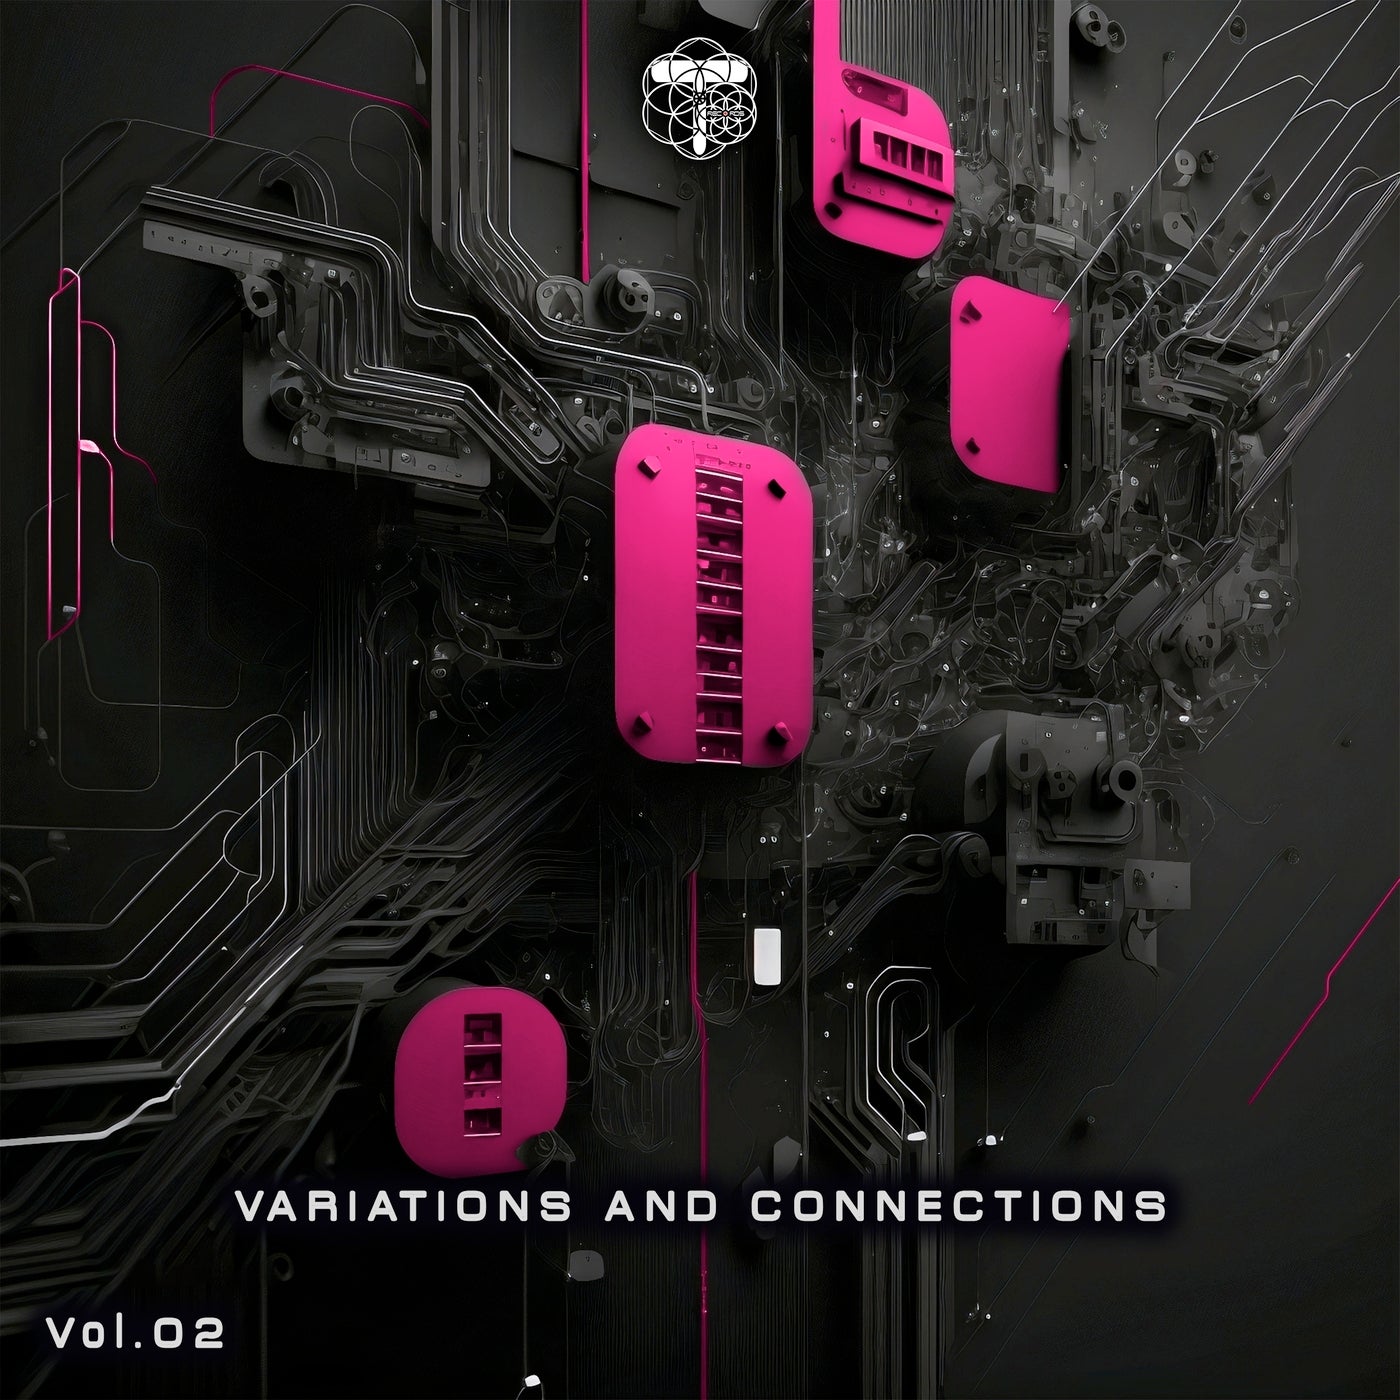 HNT, Caront – Variations and Connections, Vol.02 [1606526]